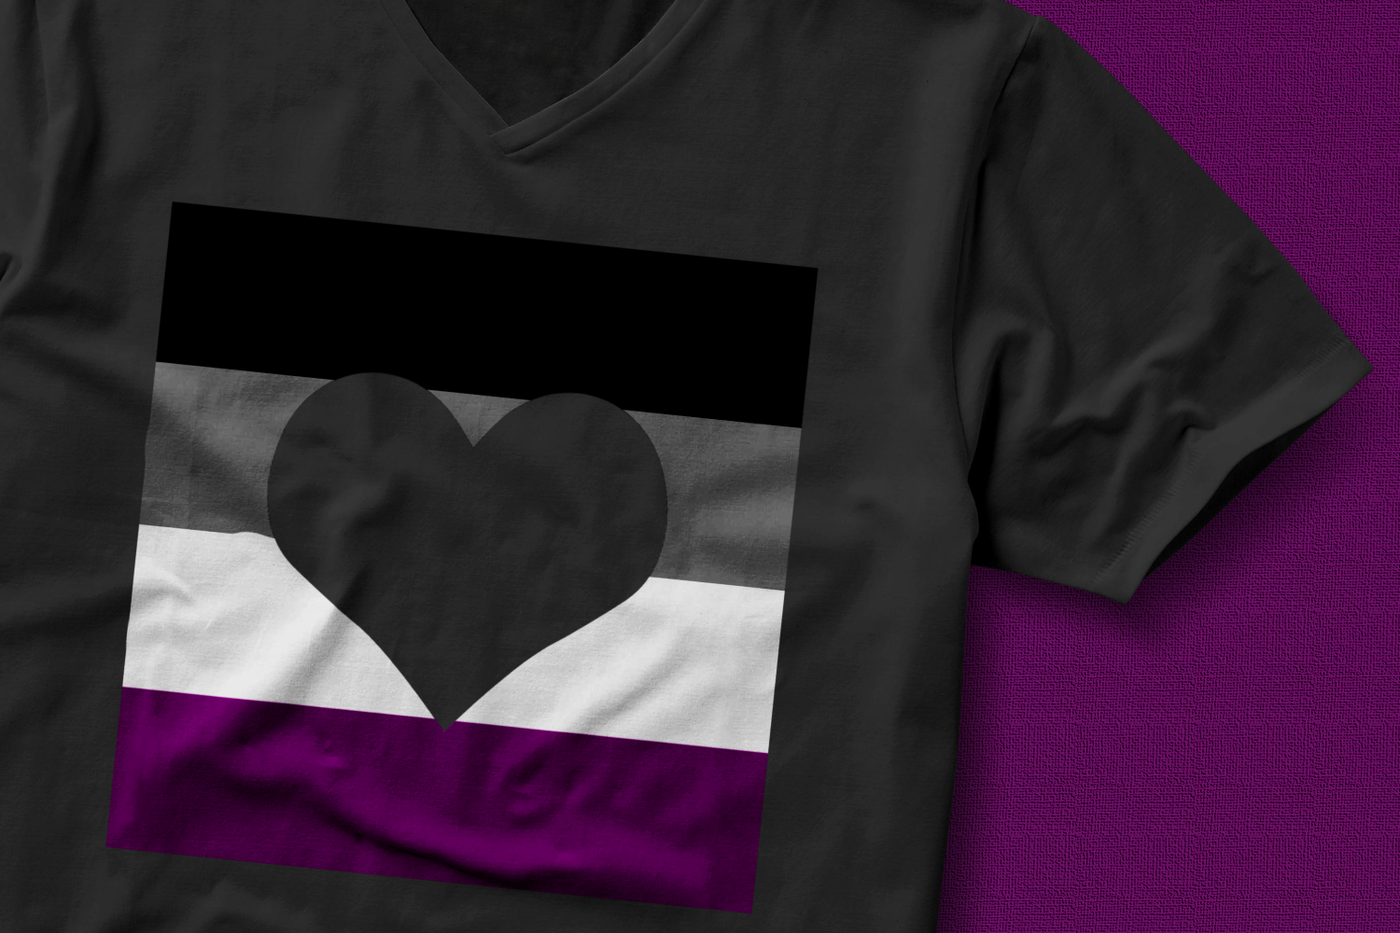 Shirt with a square striped design in the color of a pride flag and a heart in the middle.